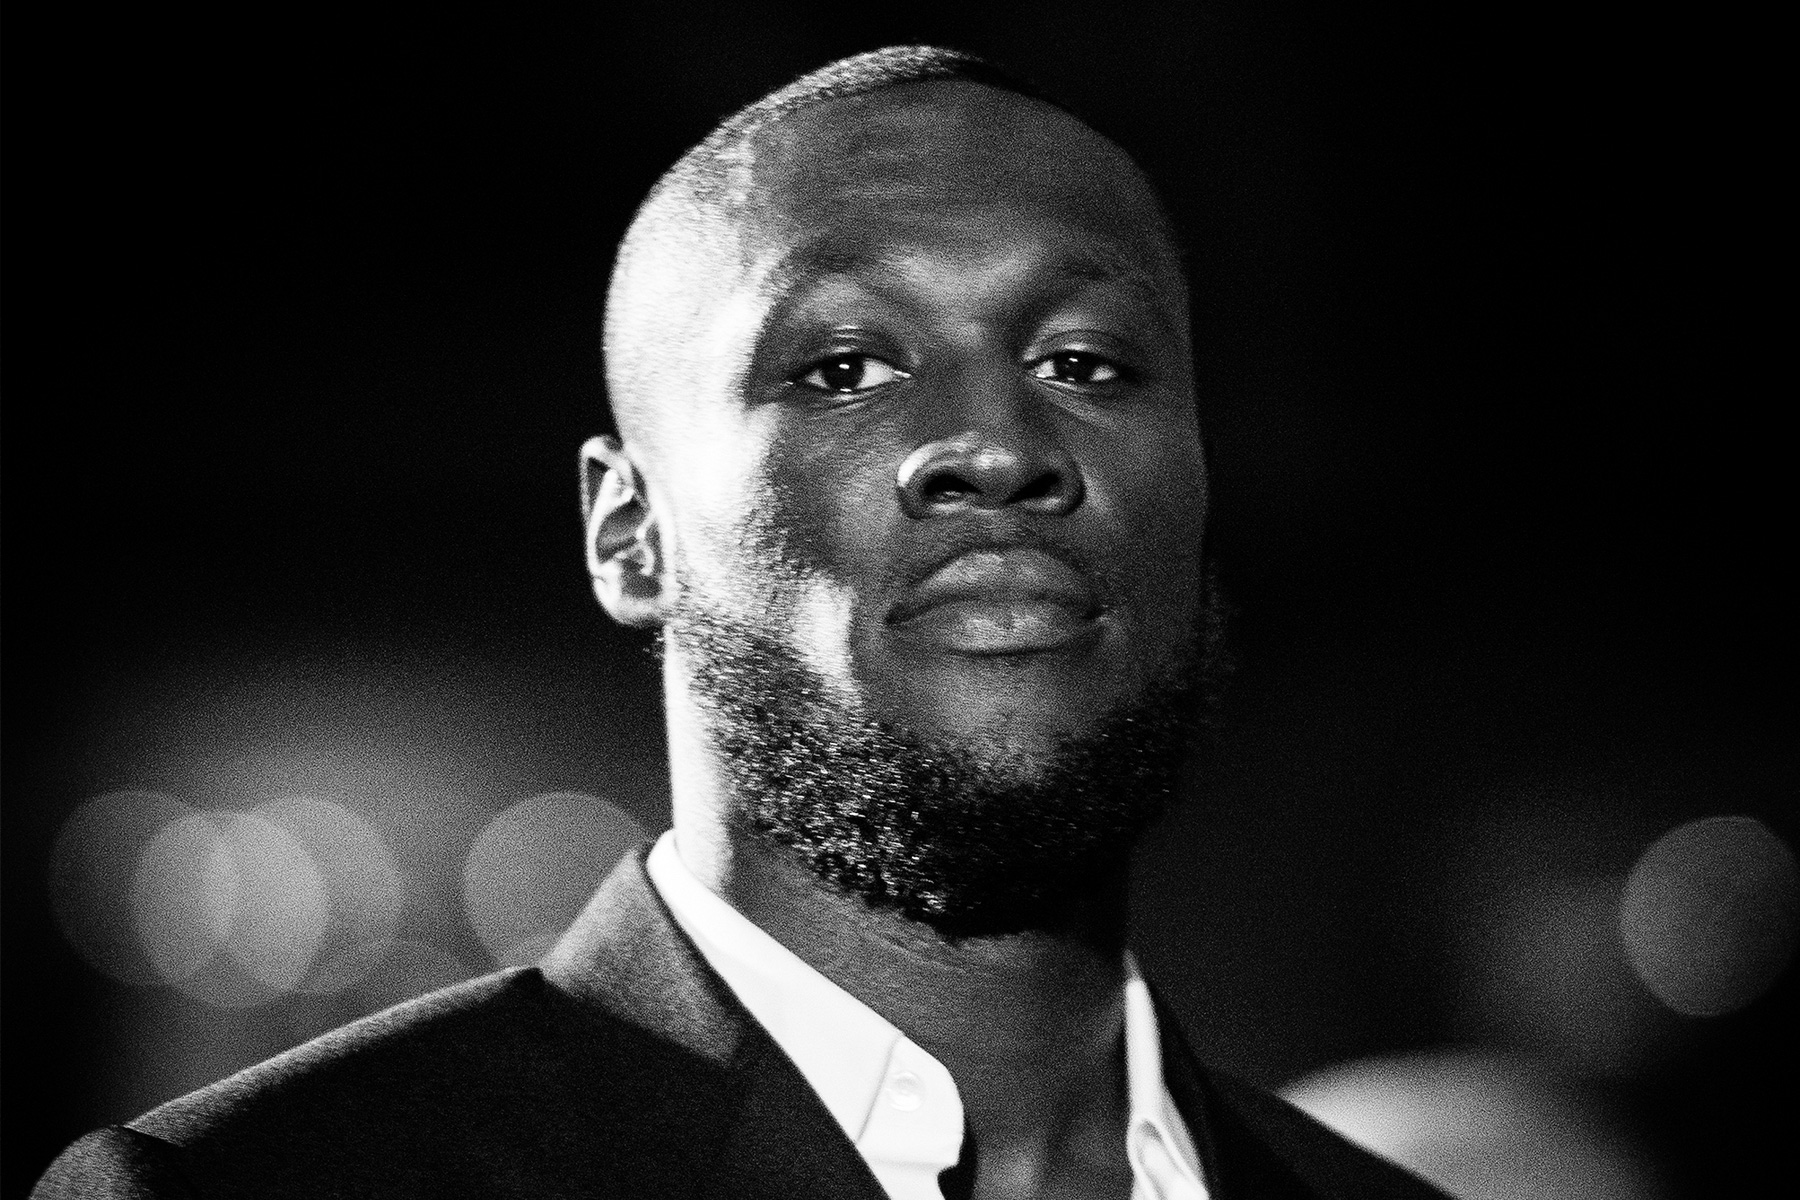 A black and white photo of Stormzy's head and shoulders